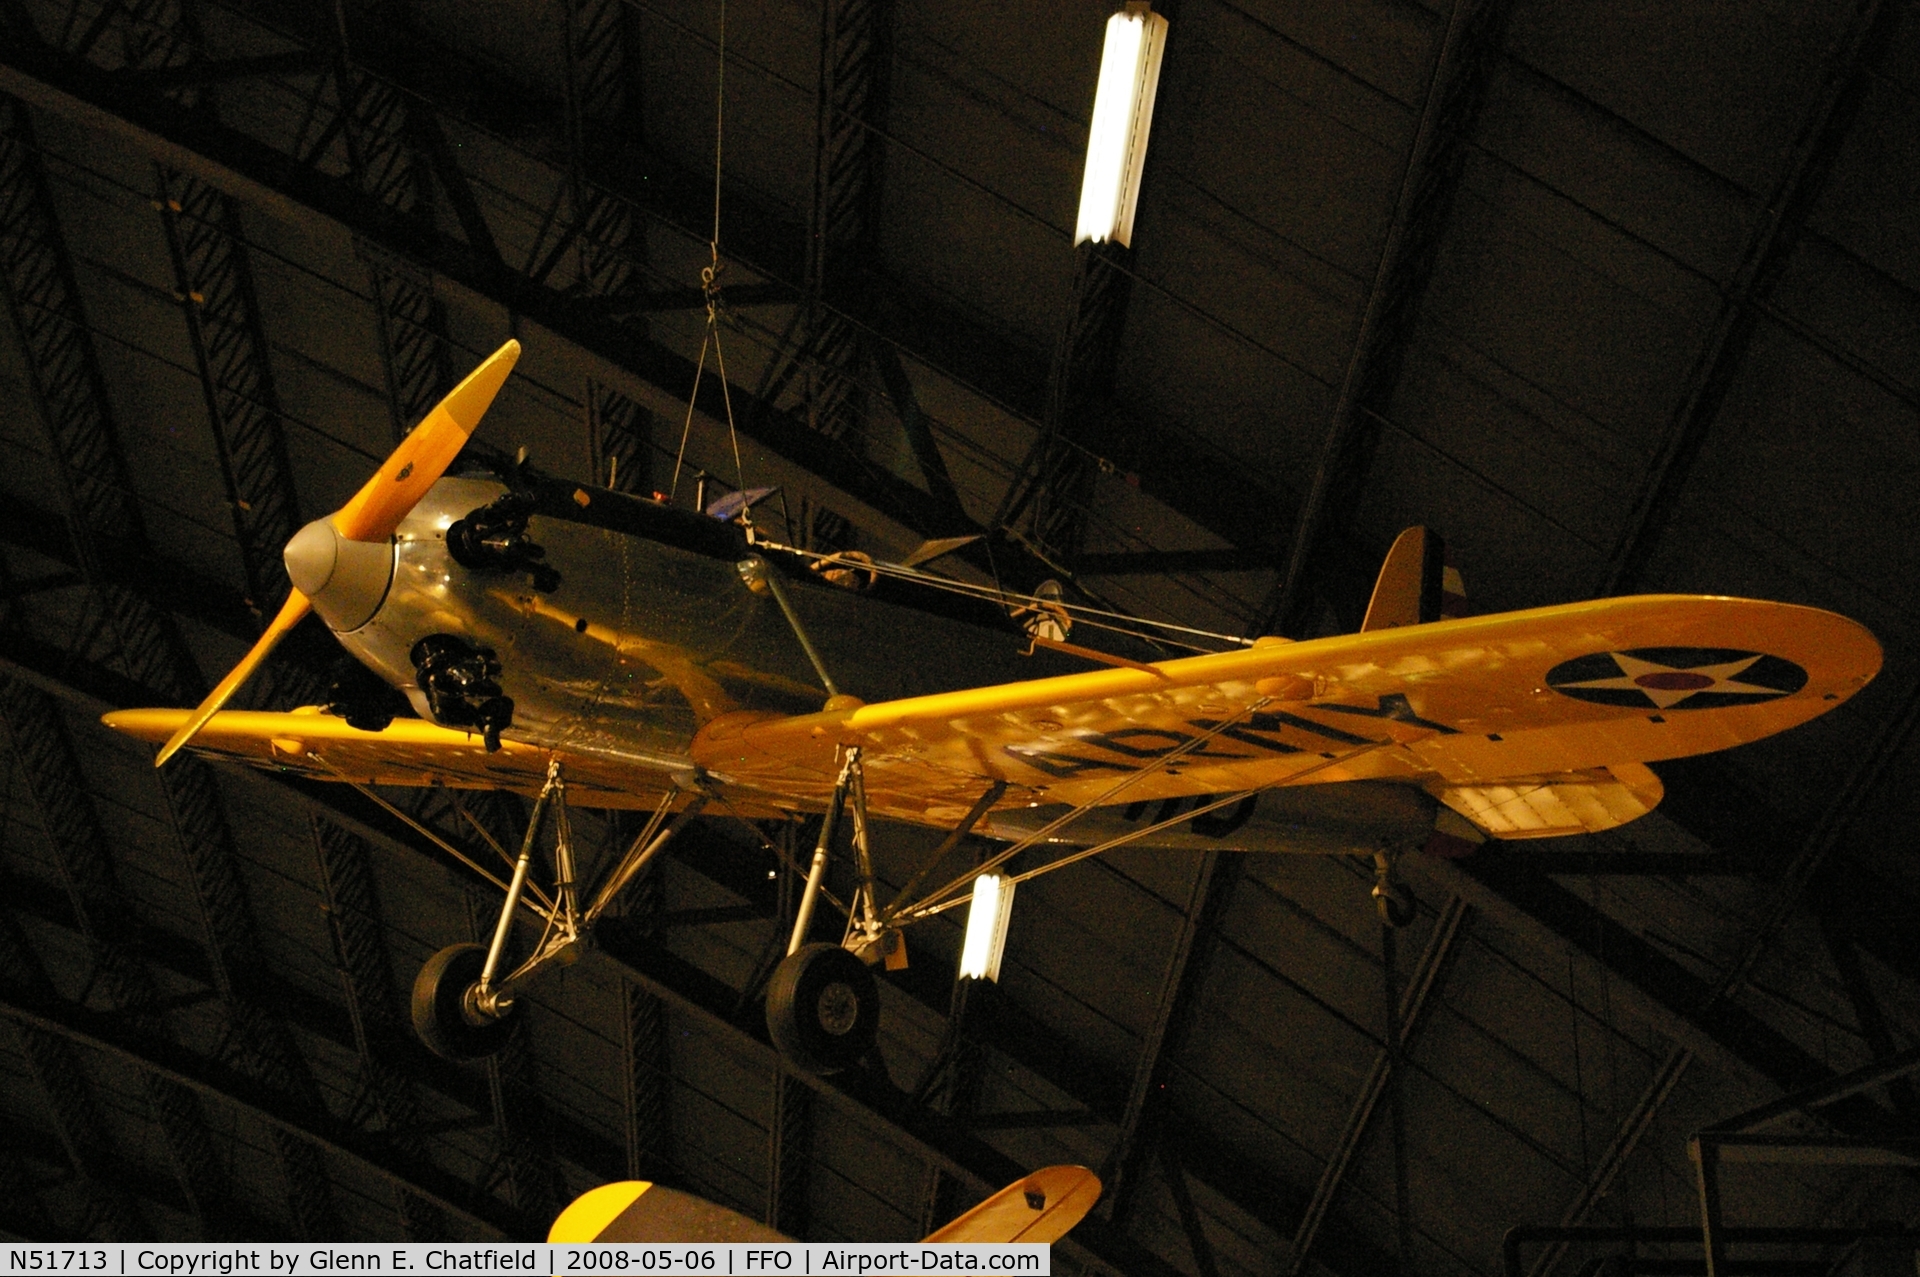 N51713, 1942 Ryan PT-22C Recruit (ST3KR) C/N 1750, PT-22 41-15721 Hanging from the ceiling in the National Museum of the U.S. Air Force